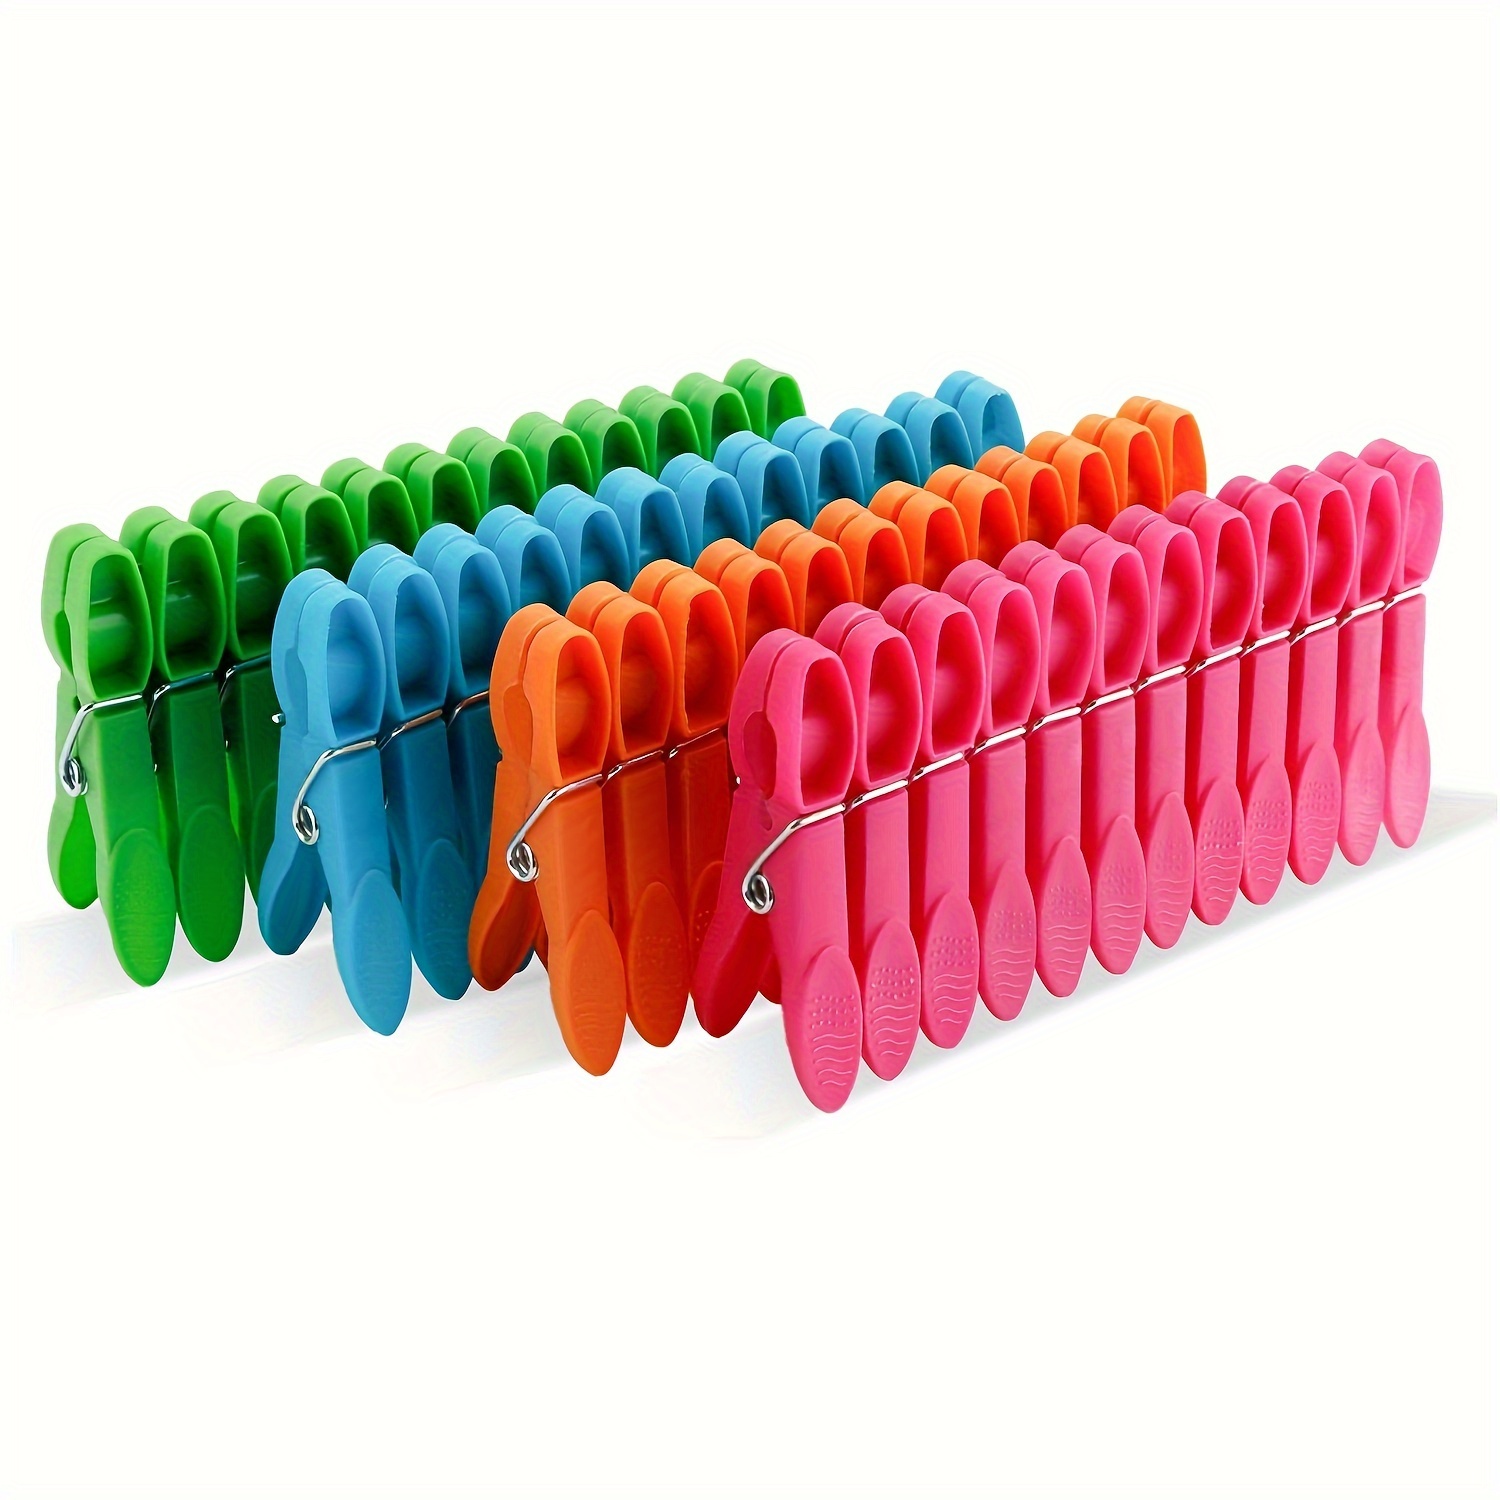 

24/48pcs Colorful Plastic Clothespins, Strong Grip Laundry Pegs, Non-slip No Mark Multipurpose Clips For Socks, Towels, Beach - Durable & Rustproof